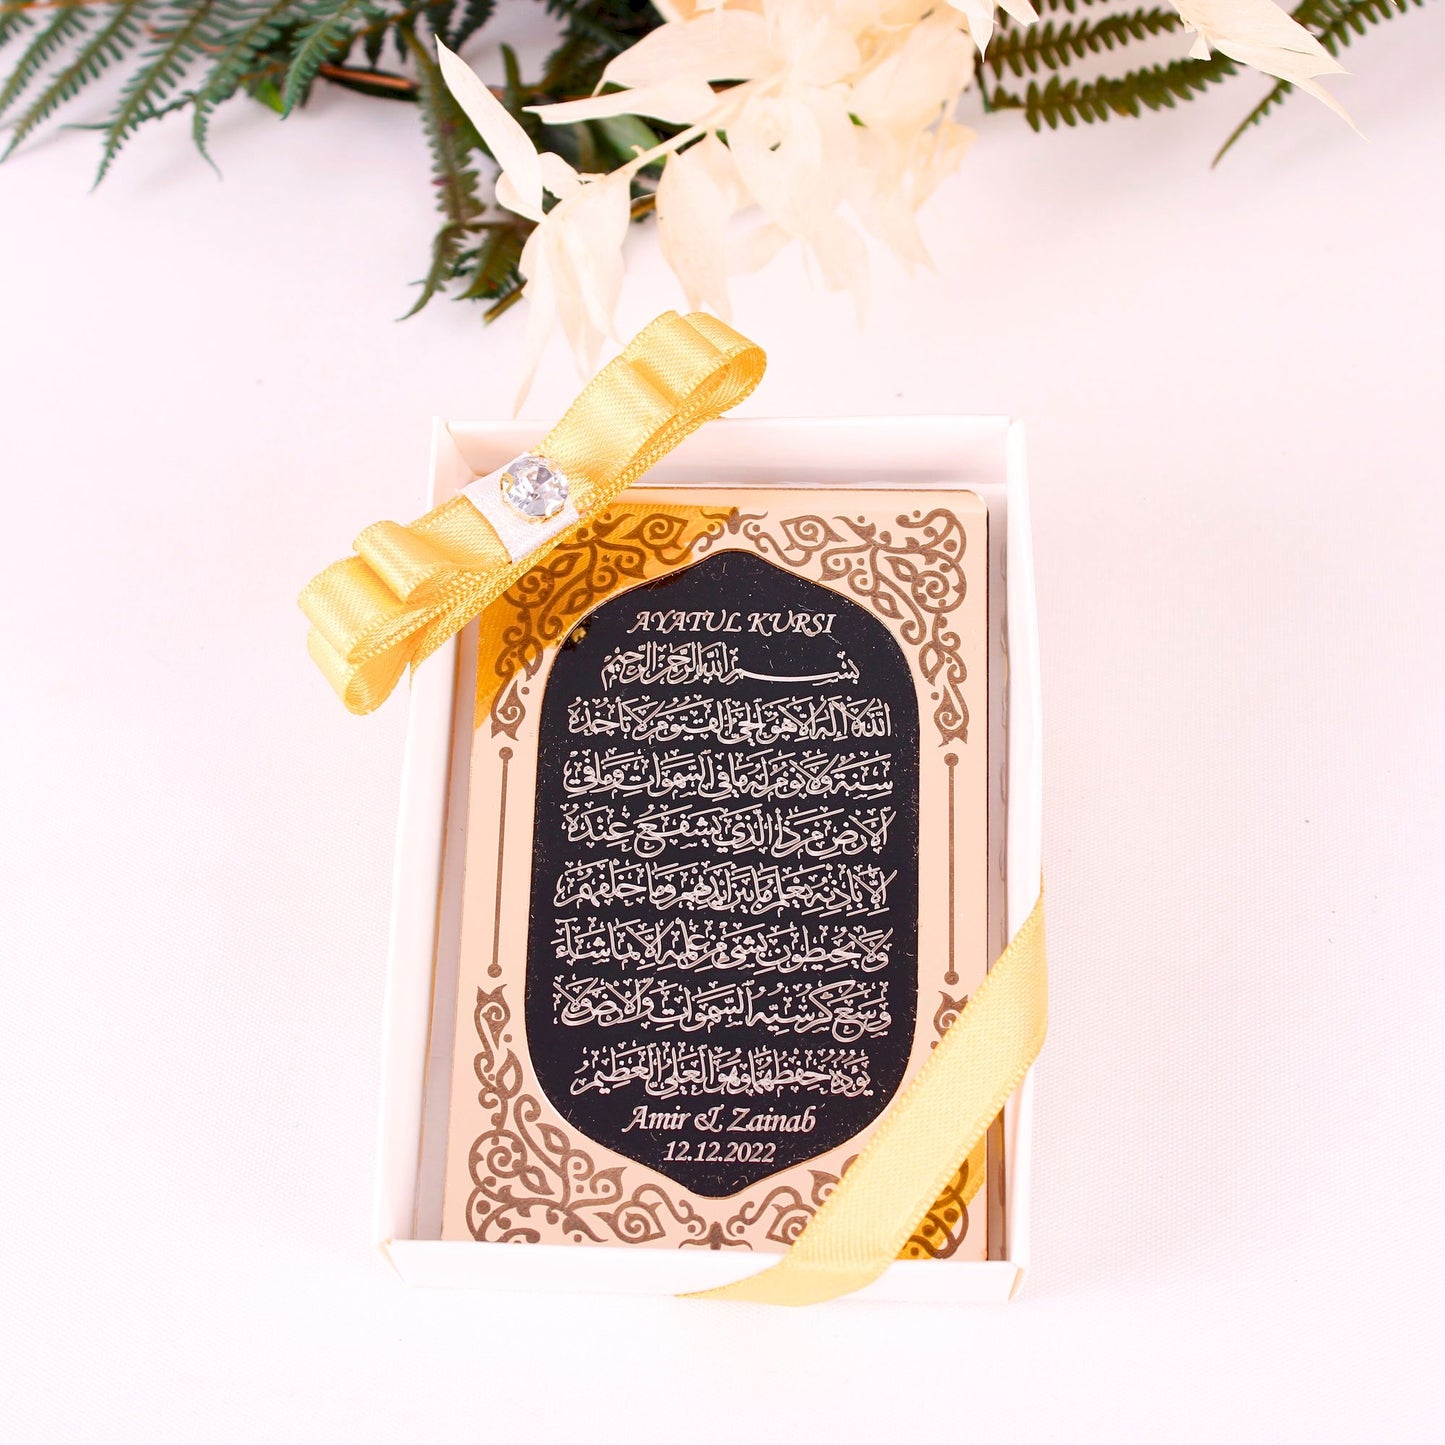 Personalized Wedding Favor Ayatul Kursi on Stand Gold Frame Black Wood - Islamic Elite Favors is a handmade gift shop offering a wide variety of unique and personalized gifts for all occasions. Whether you're looking for the perfect Ramadan, Eid, Hajj, wedding gift or something special for a birthday, baby shower or anniversary, we have something for everyone. High quality, made with love.